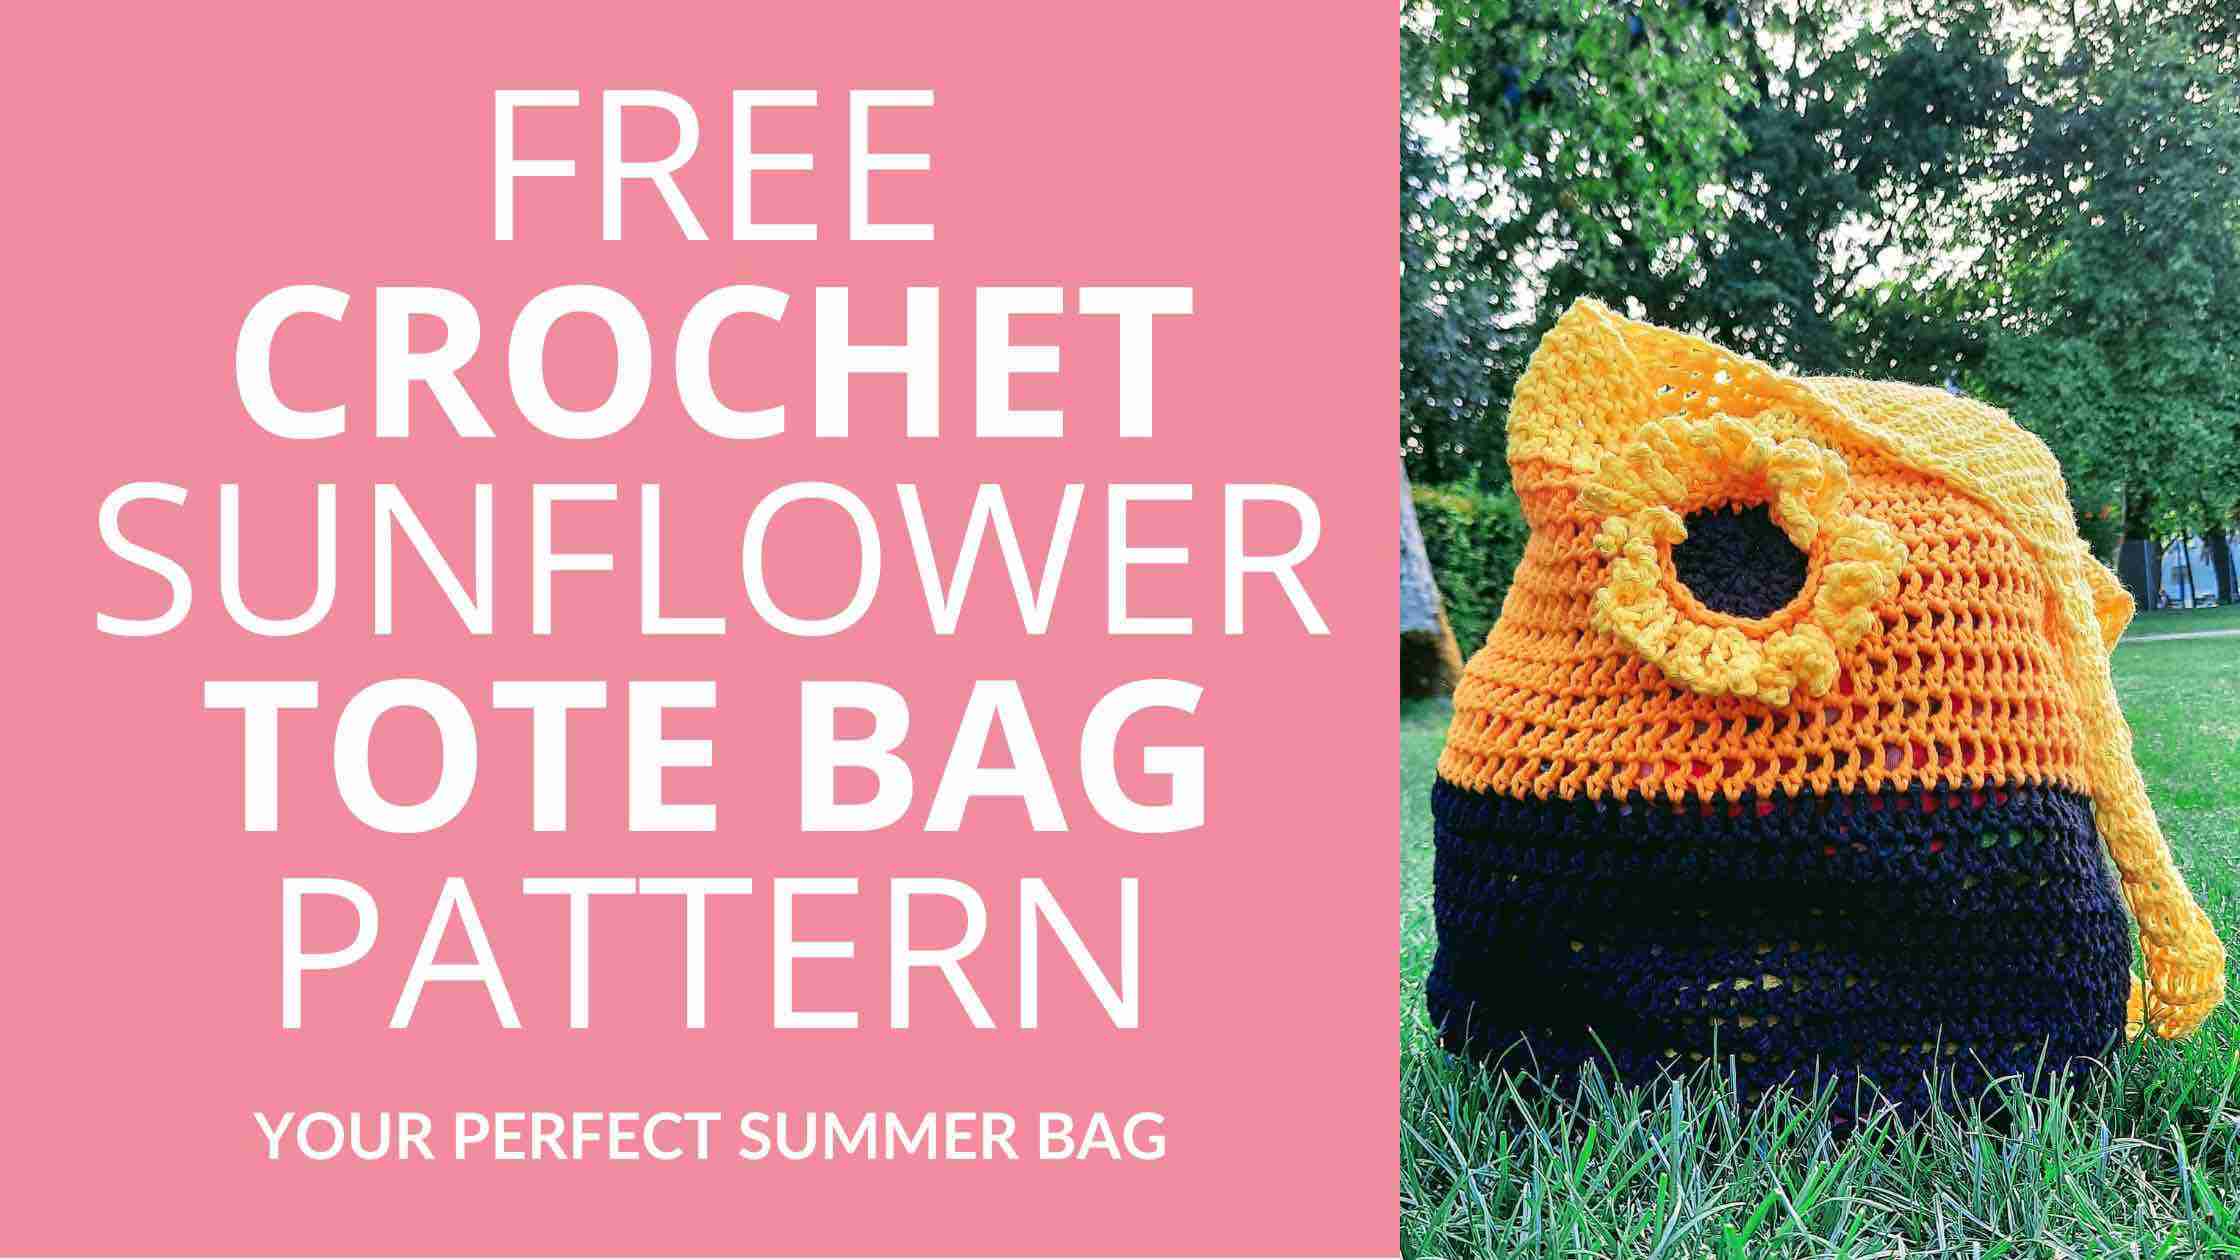 Sunflower Tote Bag Pattern Free